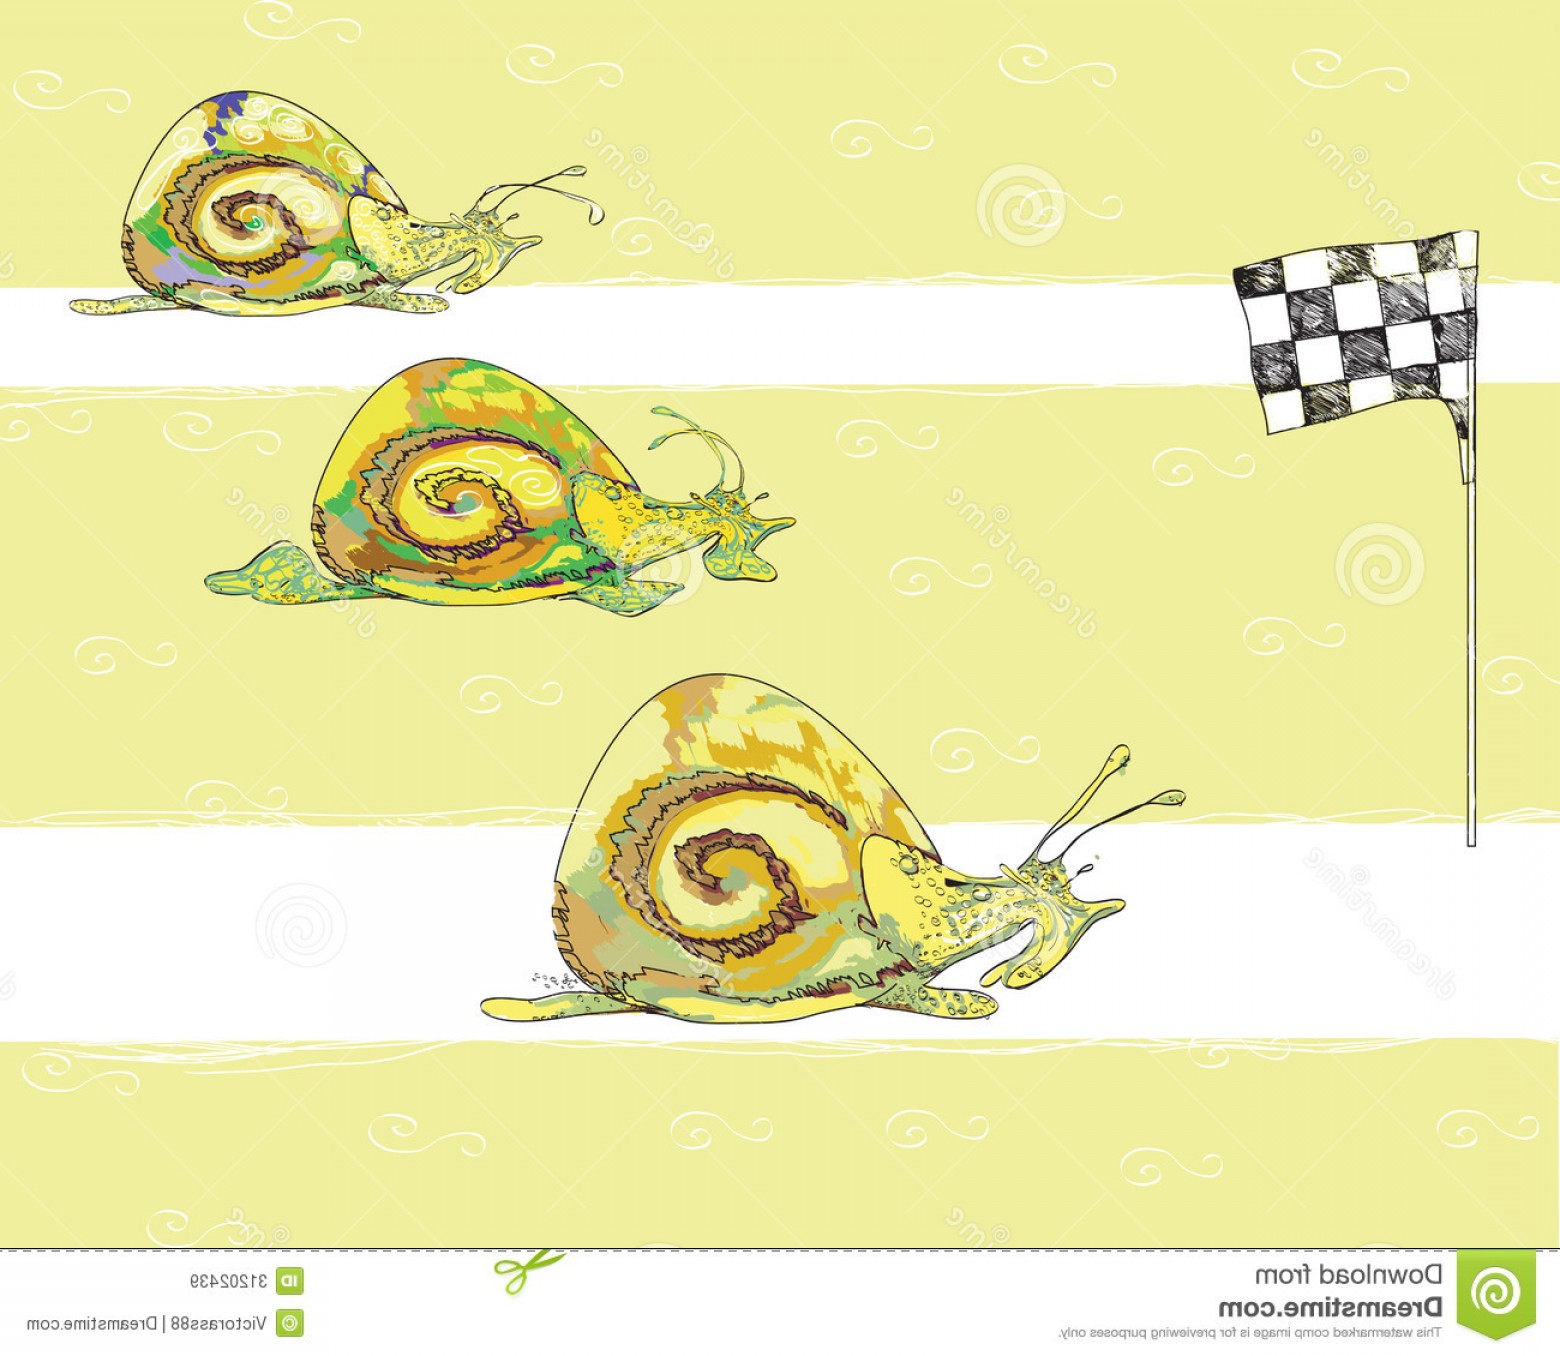 Royalty Free Stock Images Snail Racing Race Competition